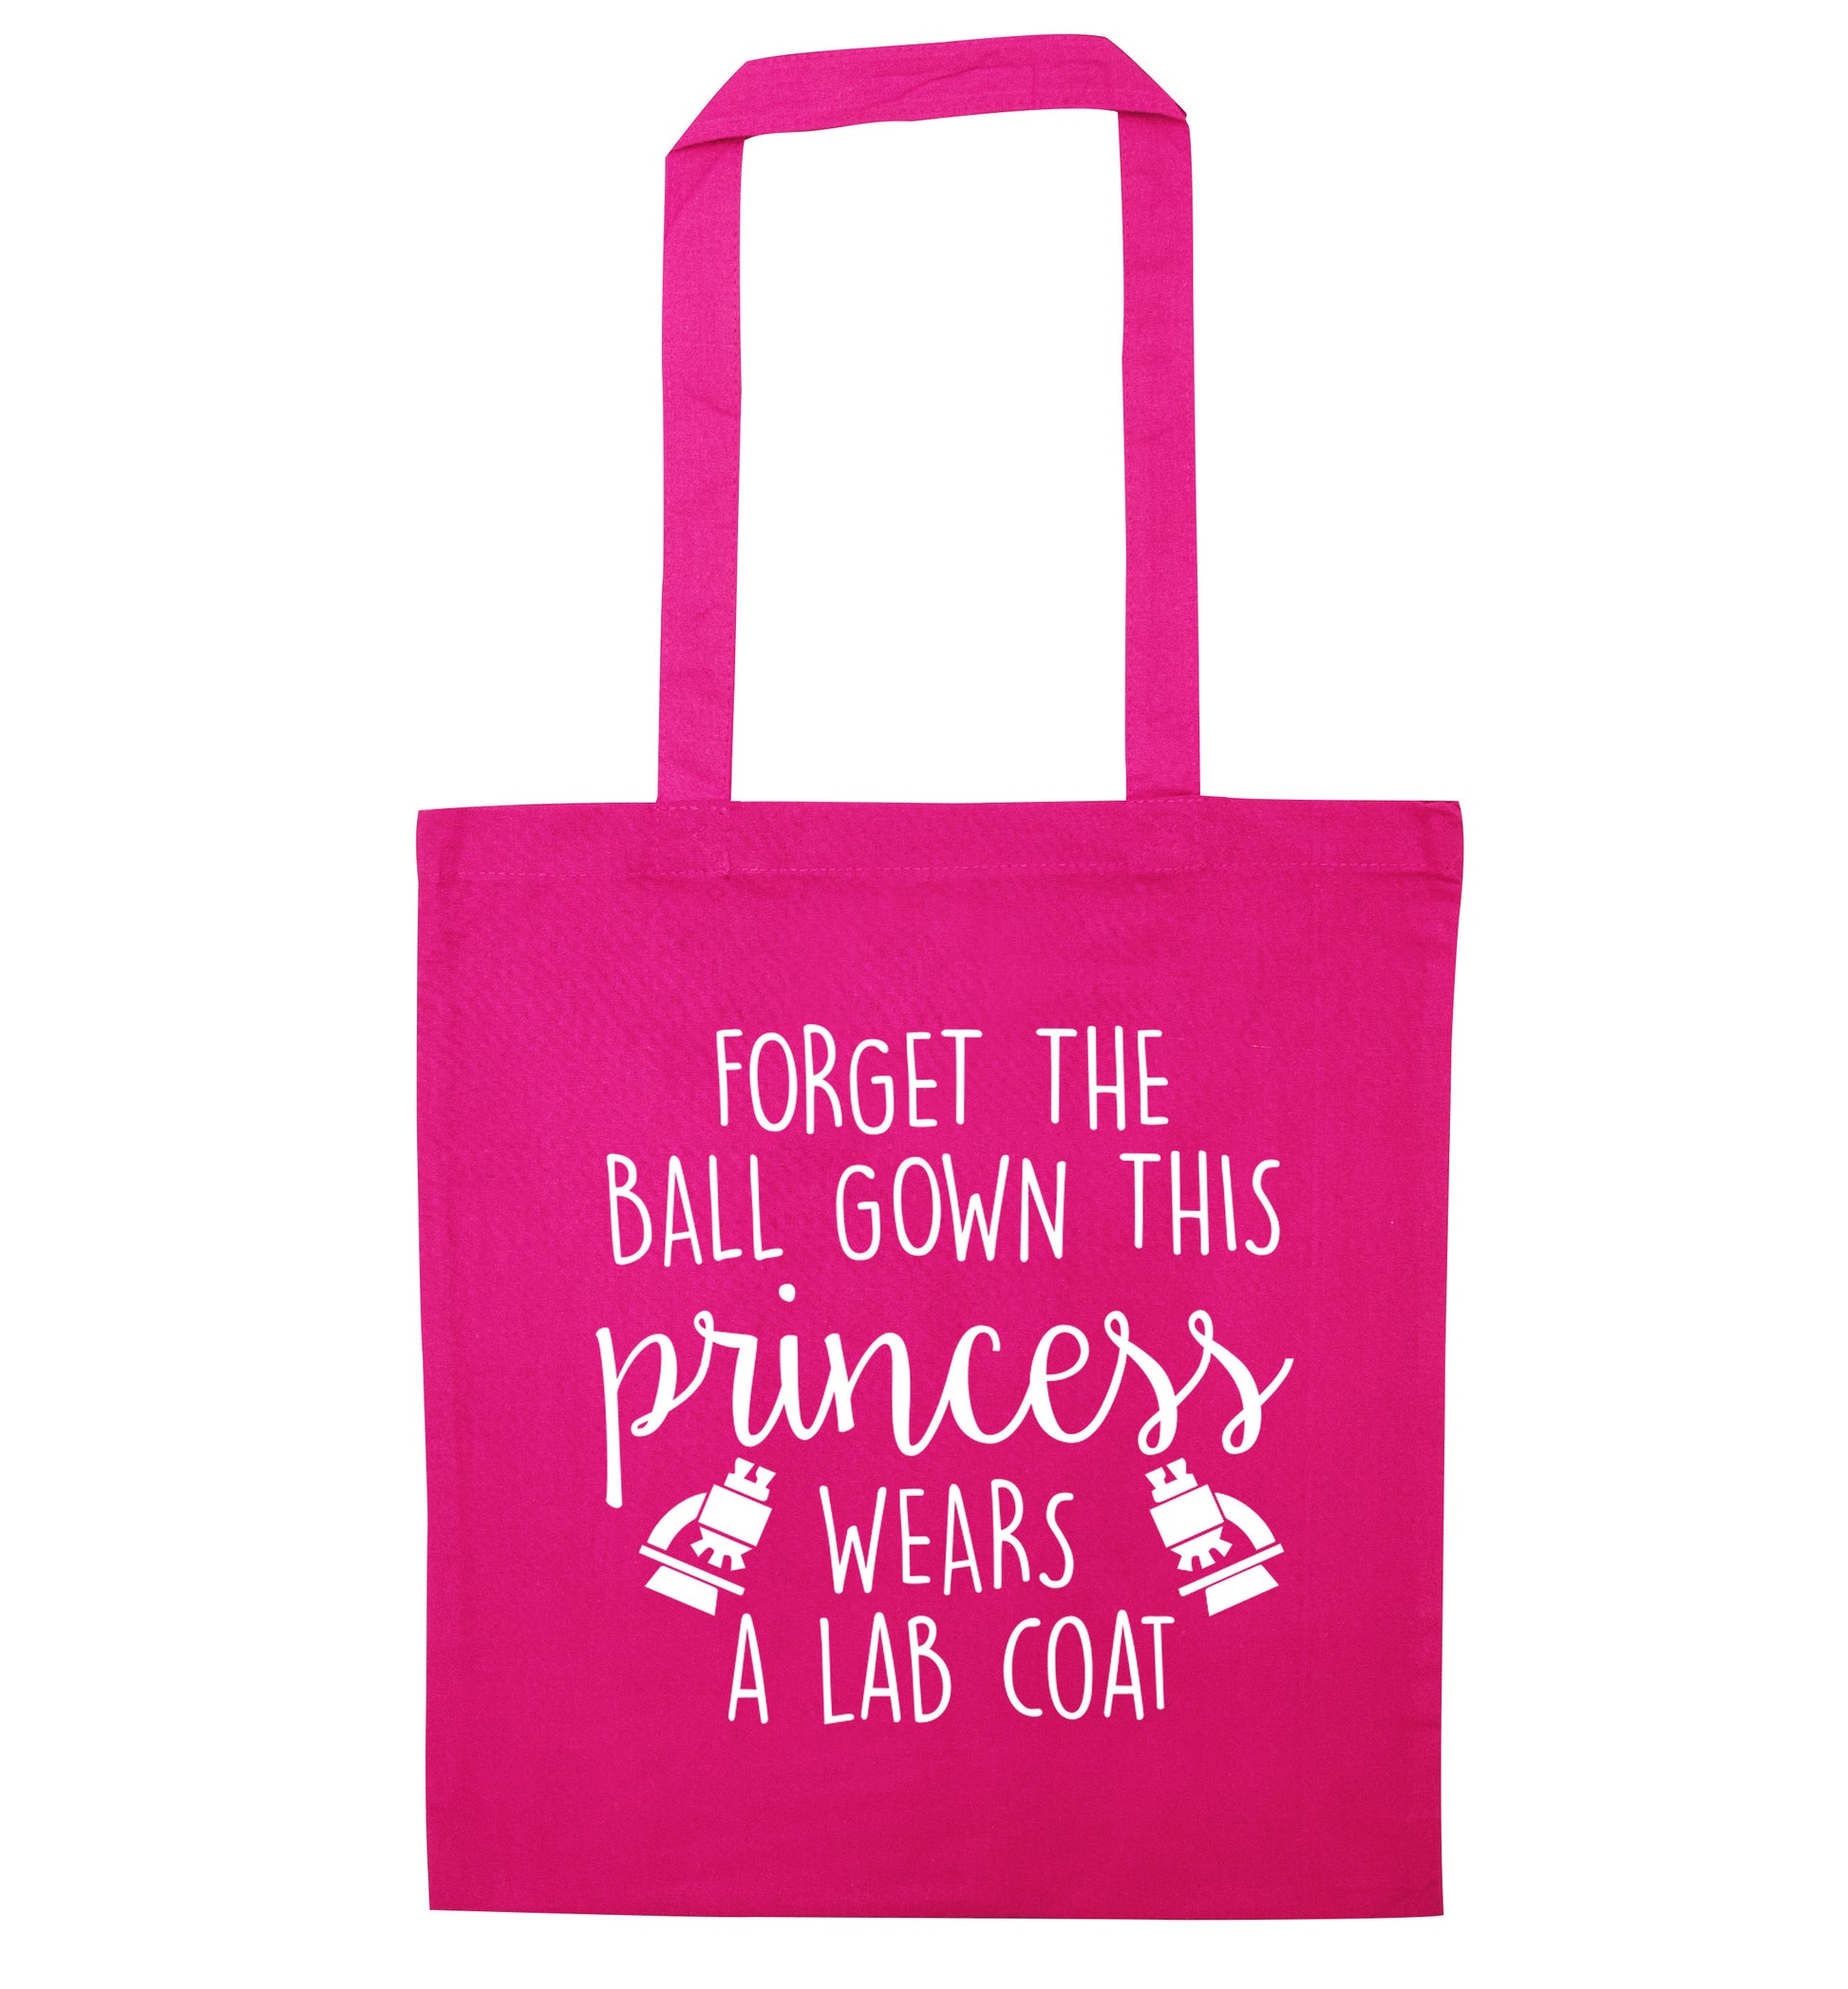 Forget the ball gown this princess wears a lab coat pink tote bag